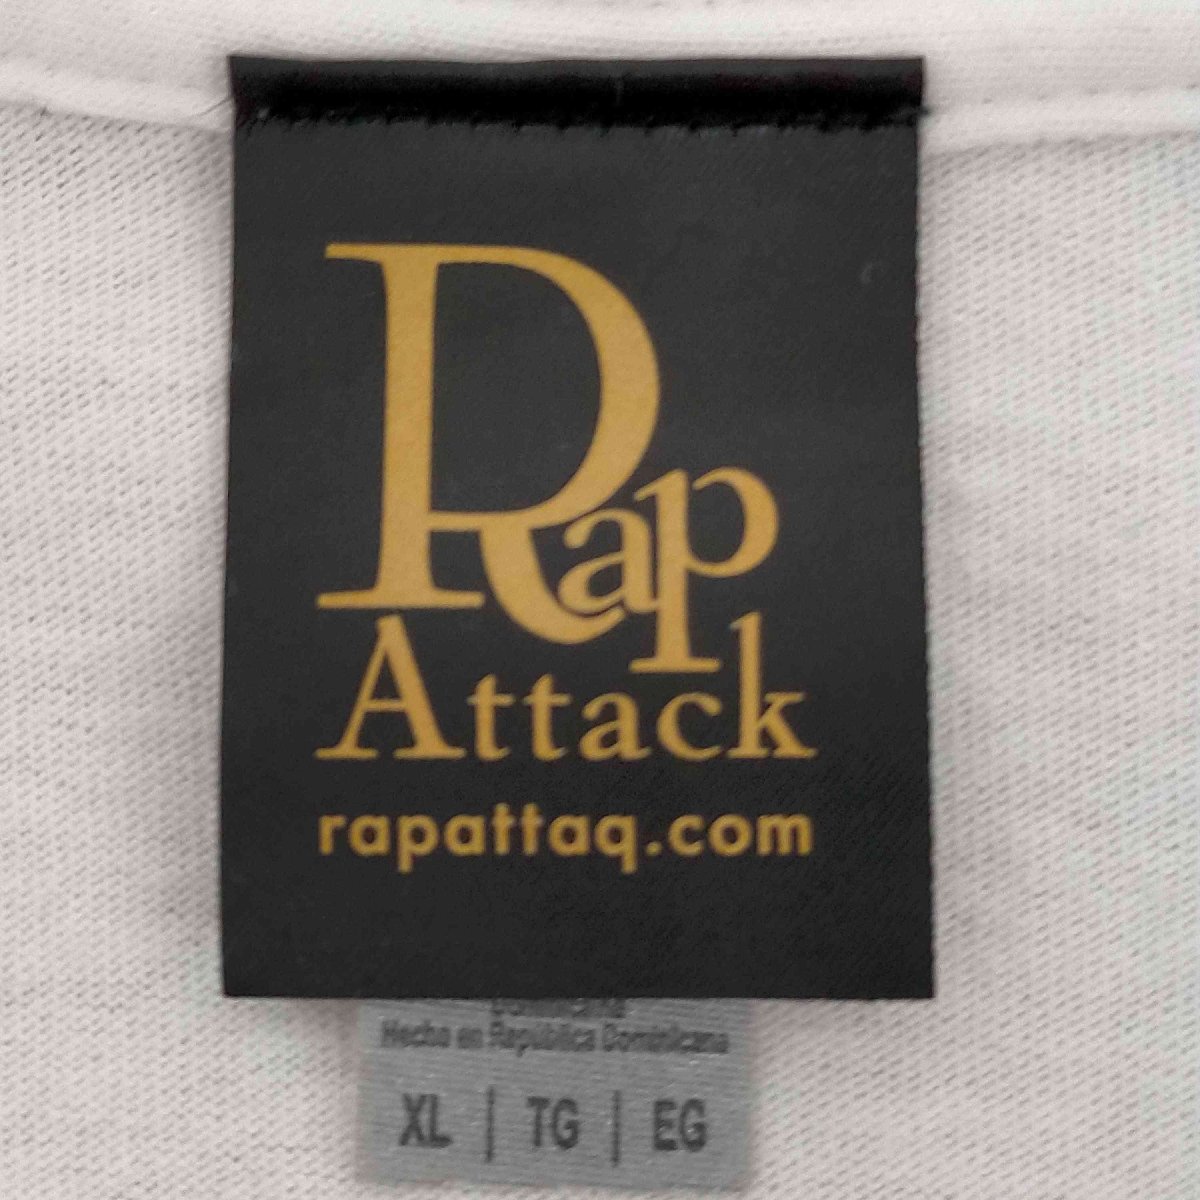 USED古着(ユーズドフルギ) rap attack rap attack Queen of hip 中古 古着 0642_画像6